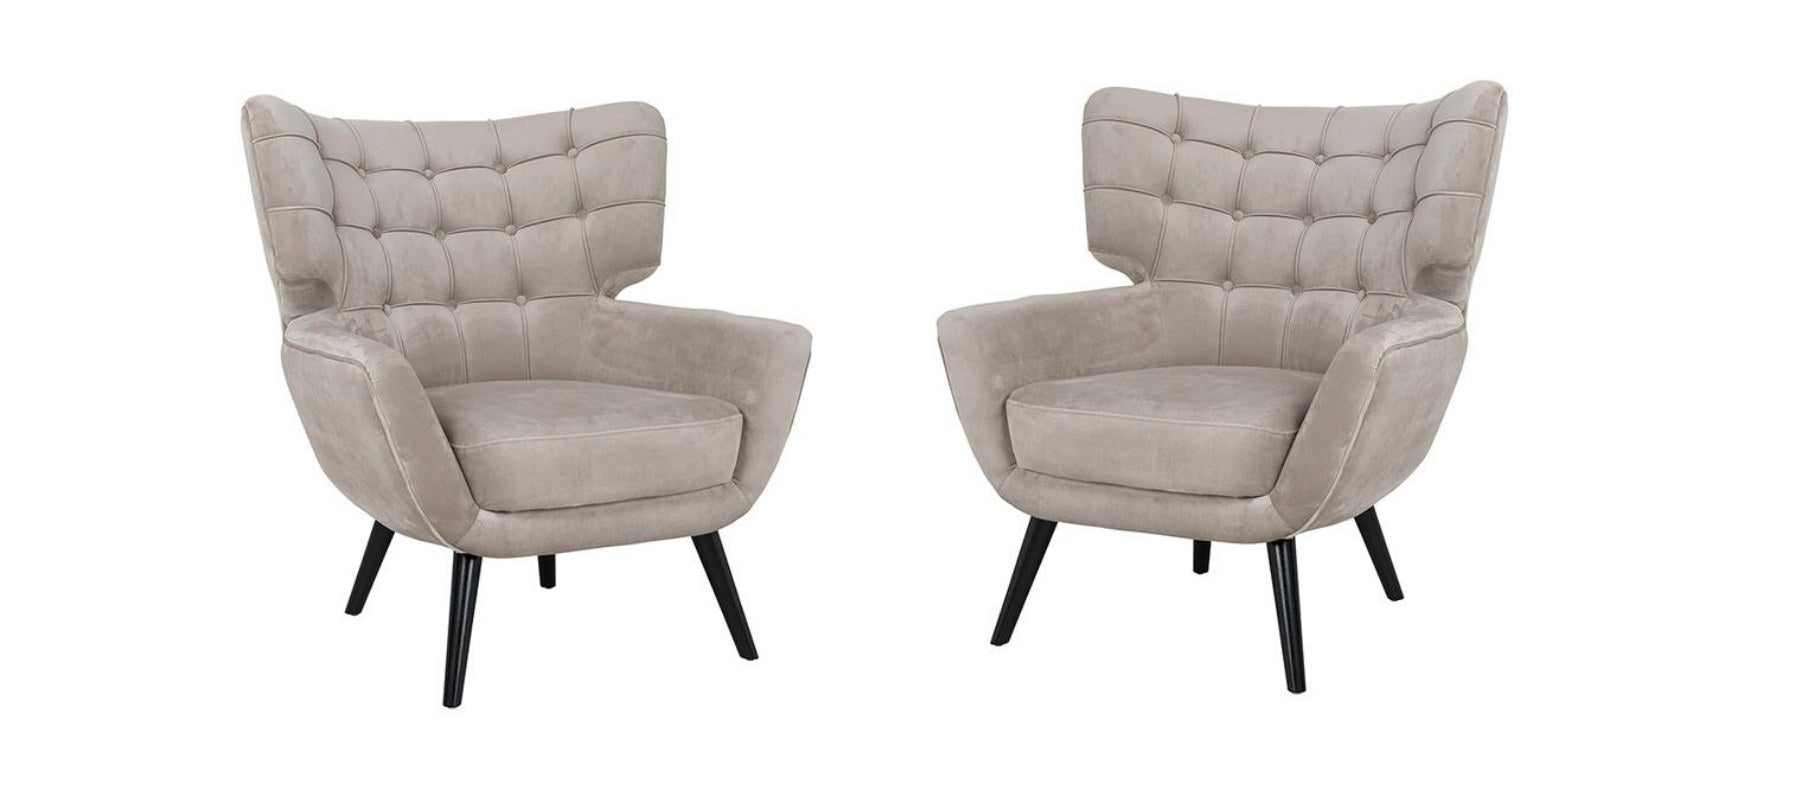 Two velvet winged back armchairs in cream fabric